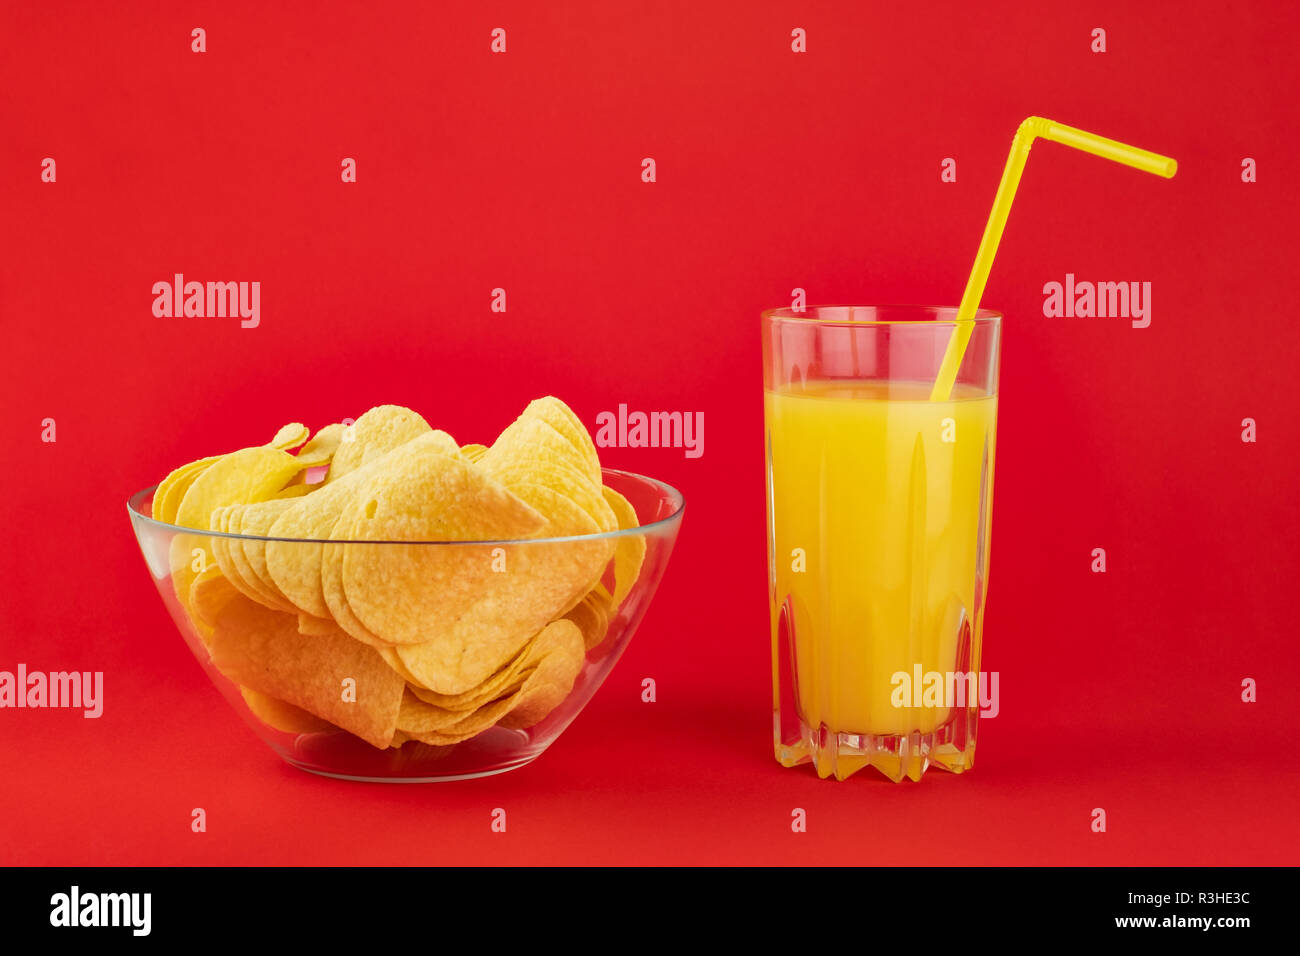 Bowl of potato chips and glass of orange drink in bright red background. Minimalistic image of attention grabbing snacks and beverage in vivid colors Stock Photo